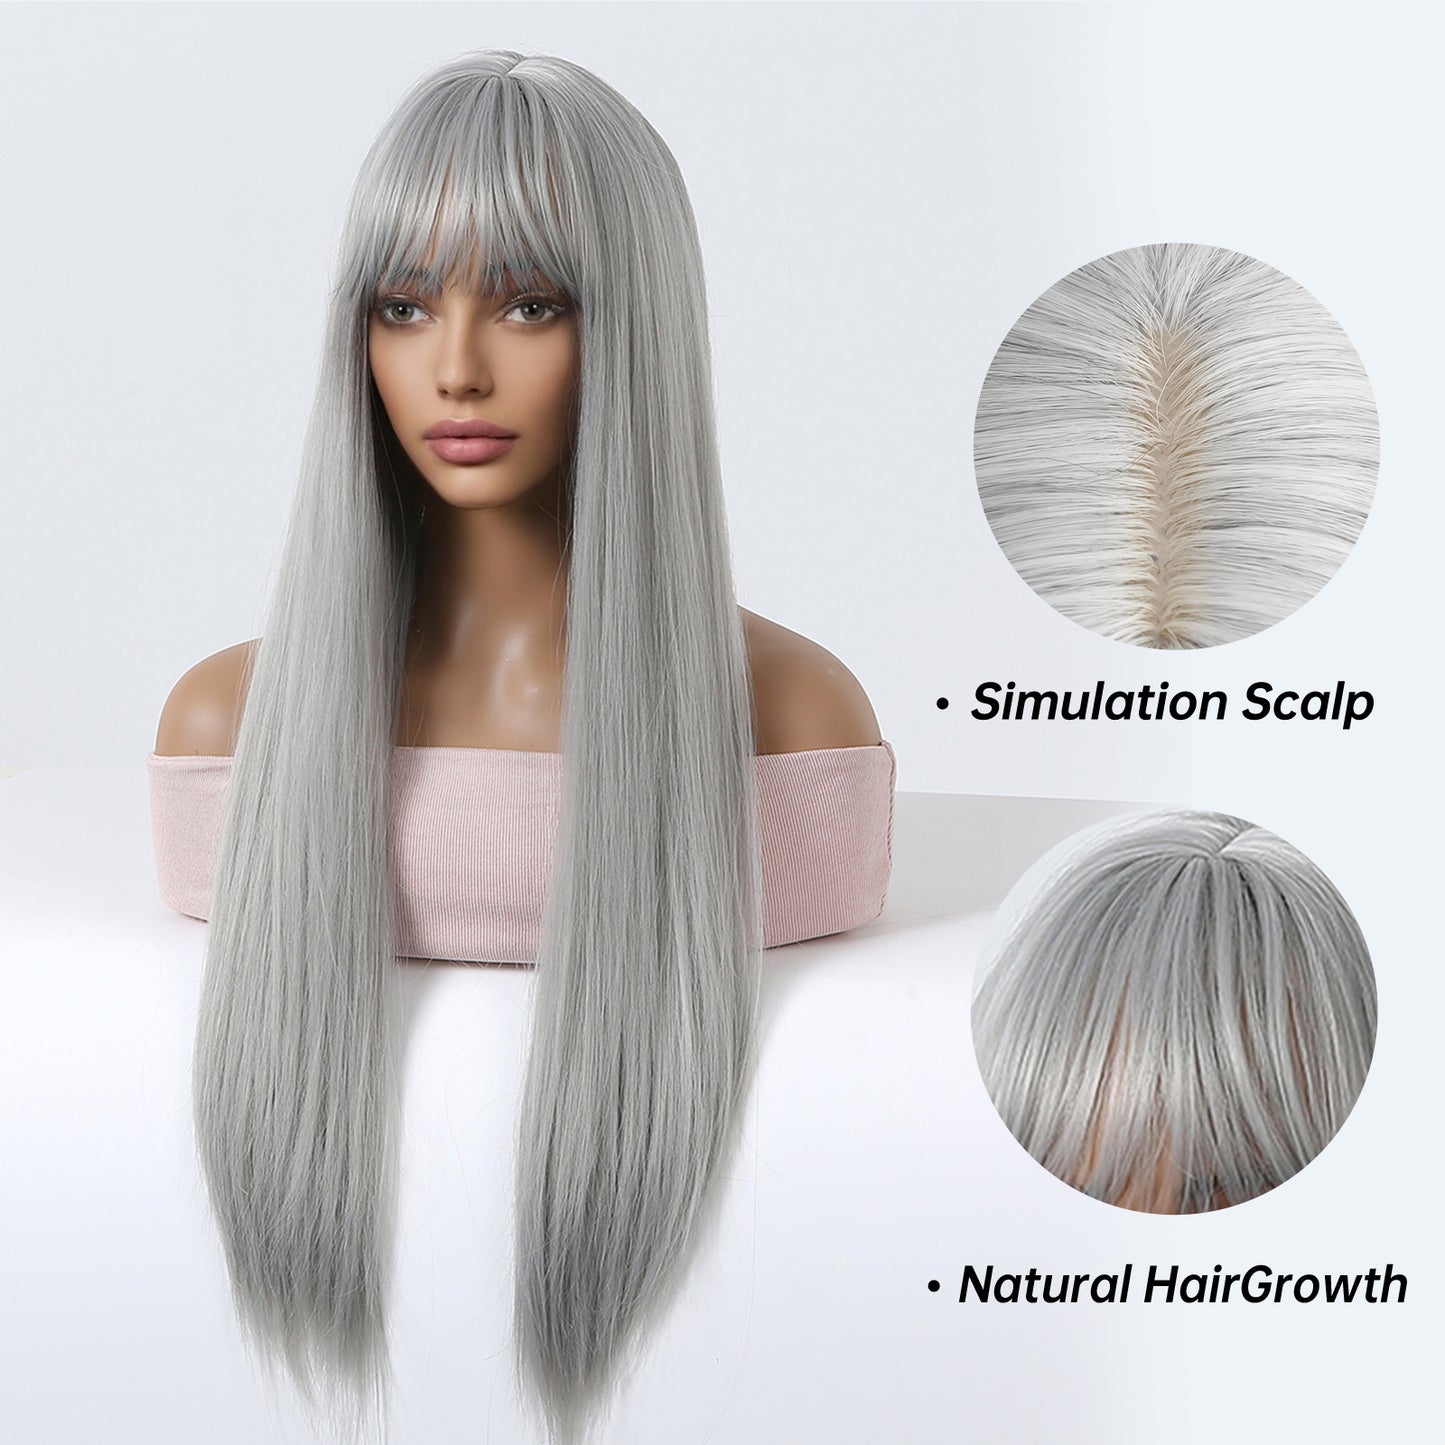 【Cressida】Loxology | 26 Inches Long Straight Argenteous Wigs with Bangs Synthetic Wig